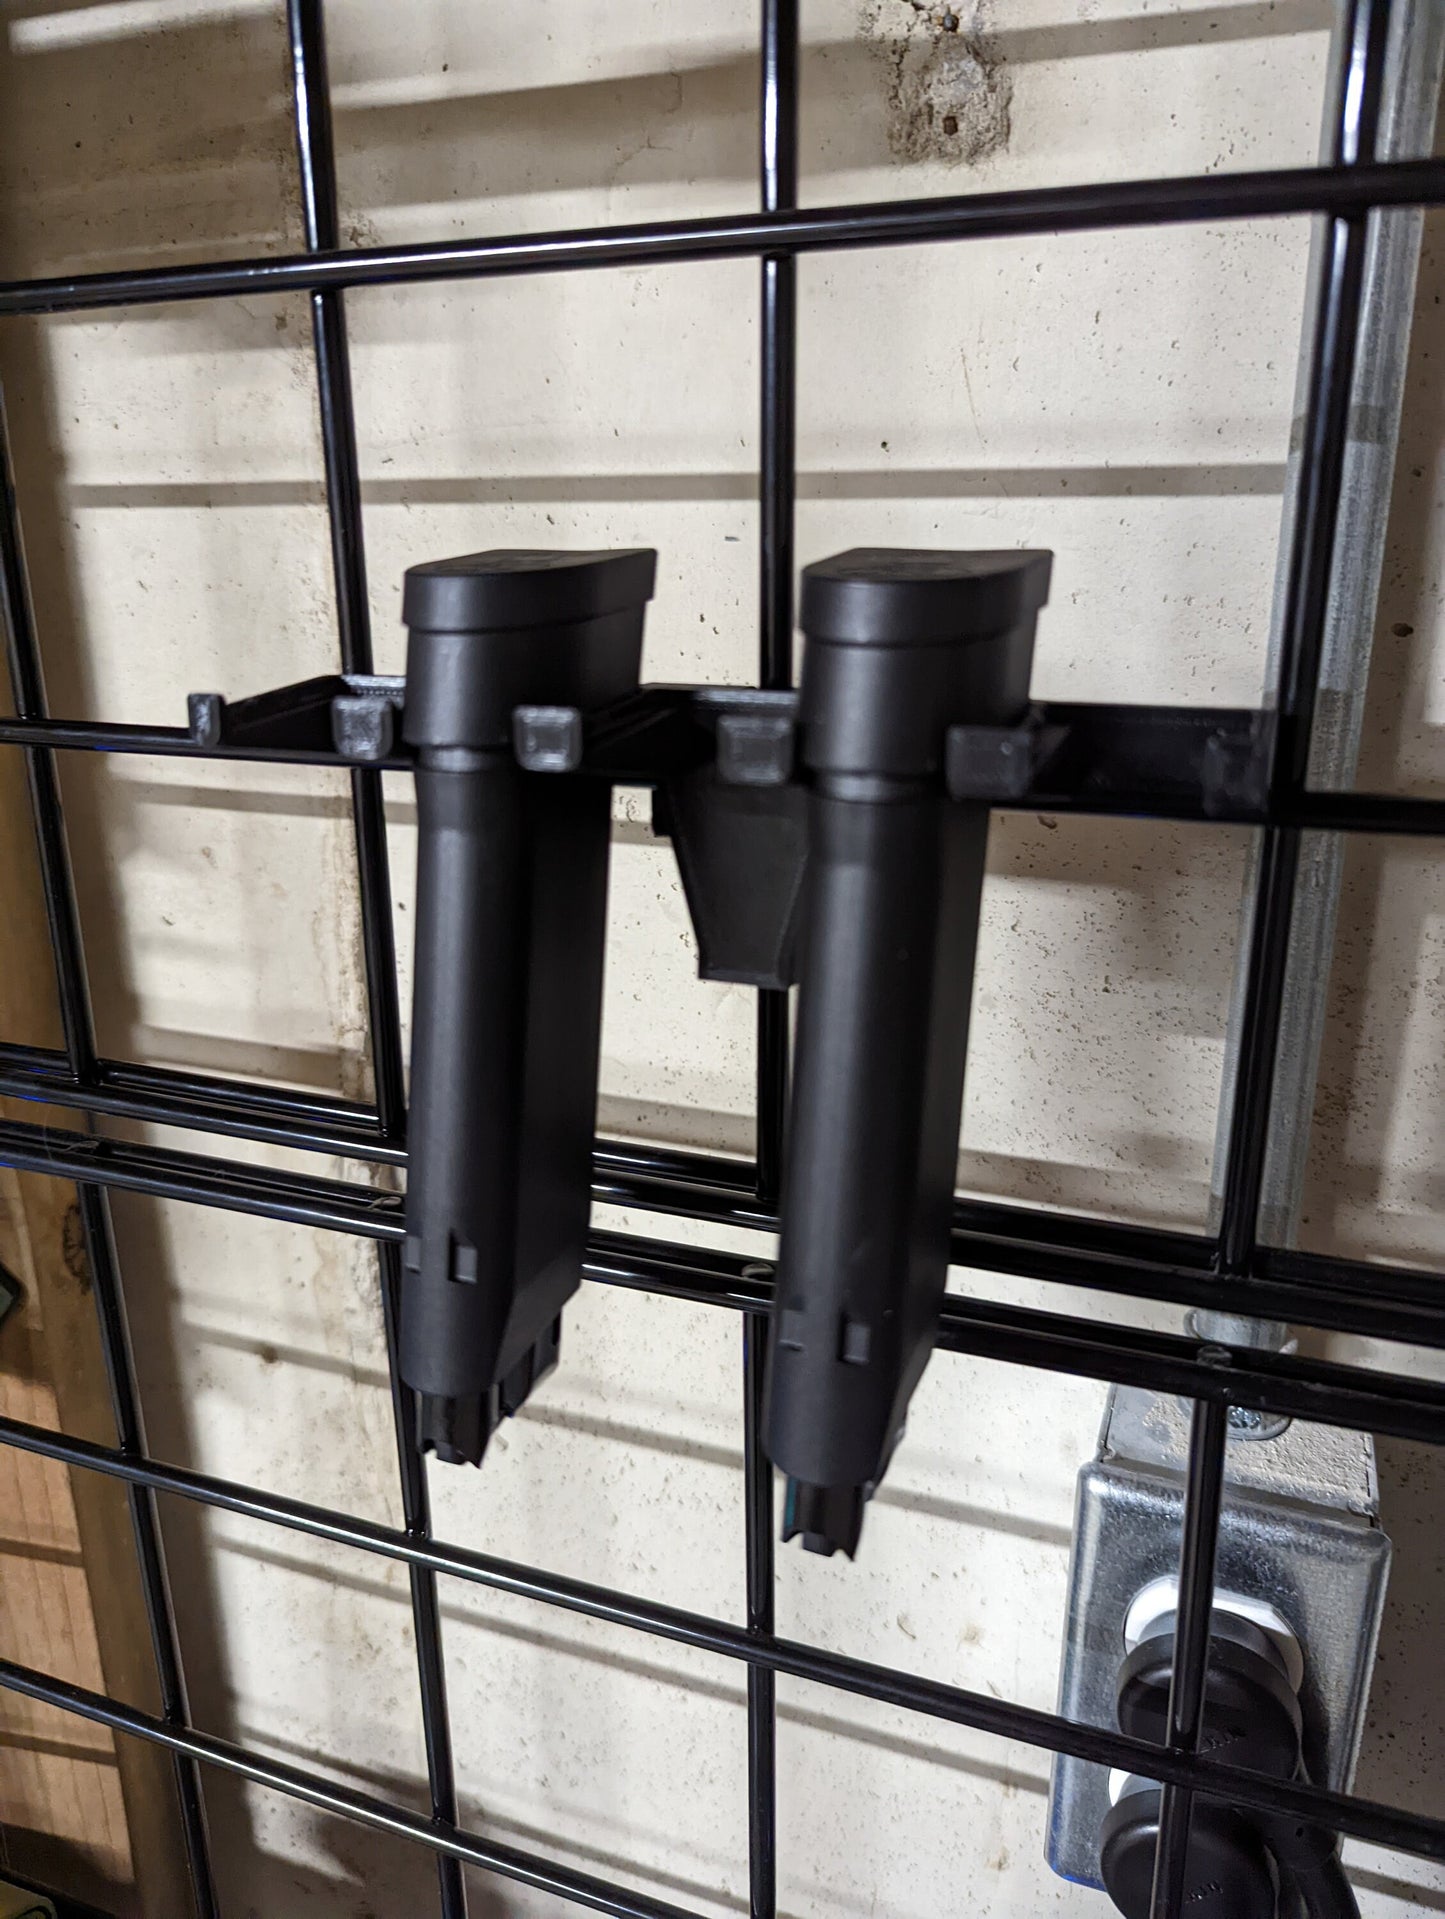 Mount for FN 502 Tactical Mags - Gridwall | Magazine Holder Storage Rack